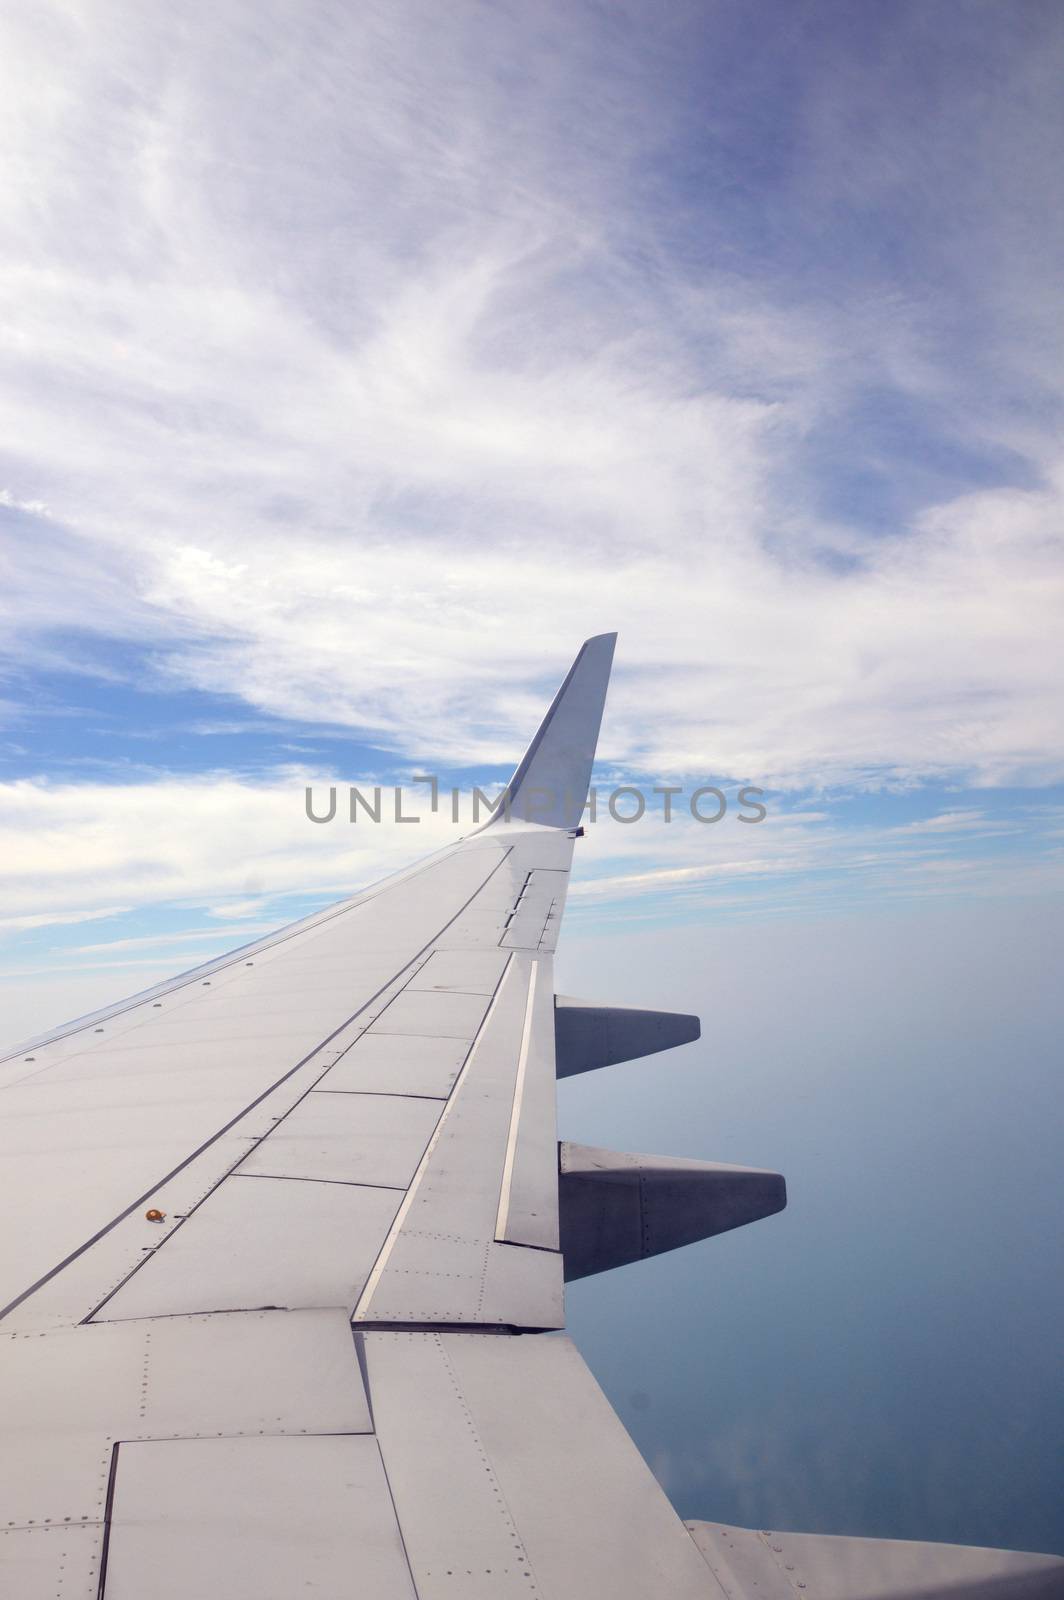 View of beautiful cloud and wing of airplane from window